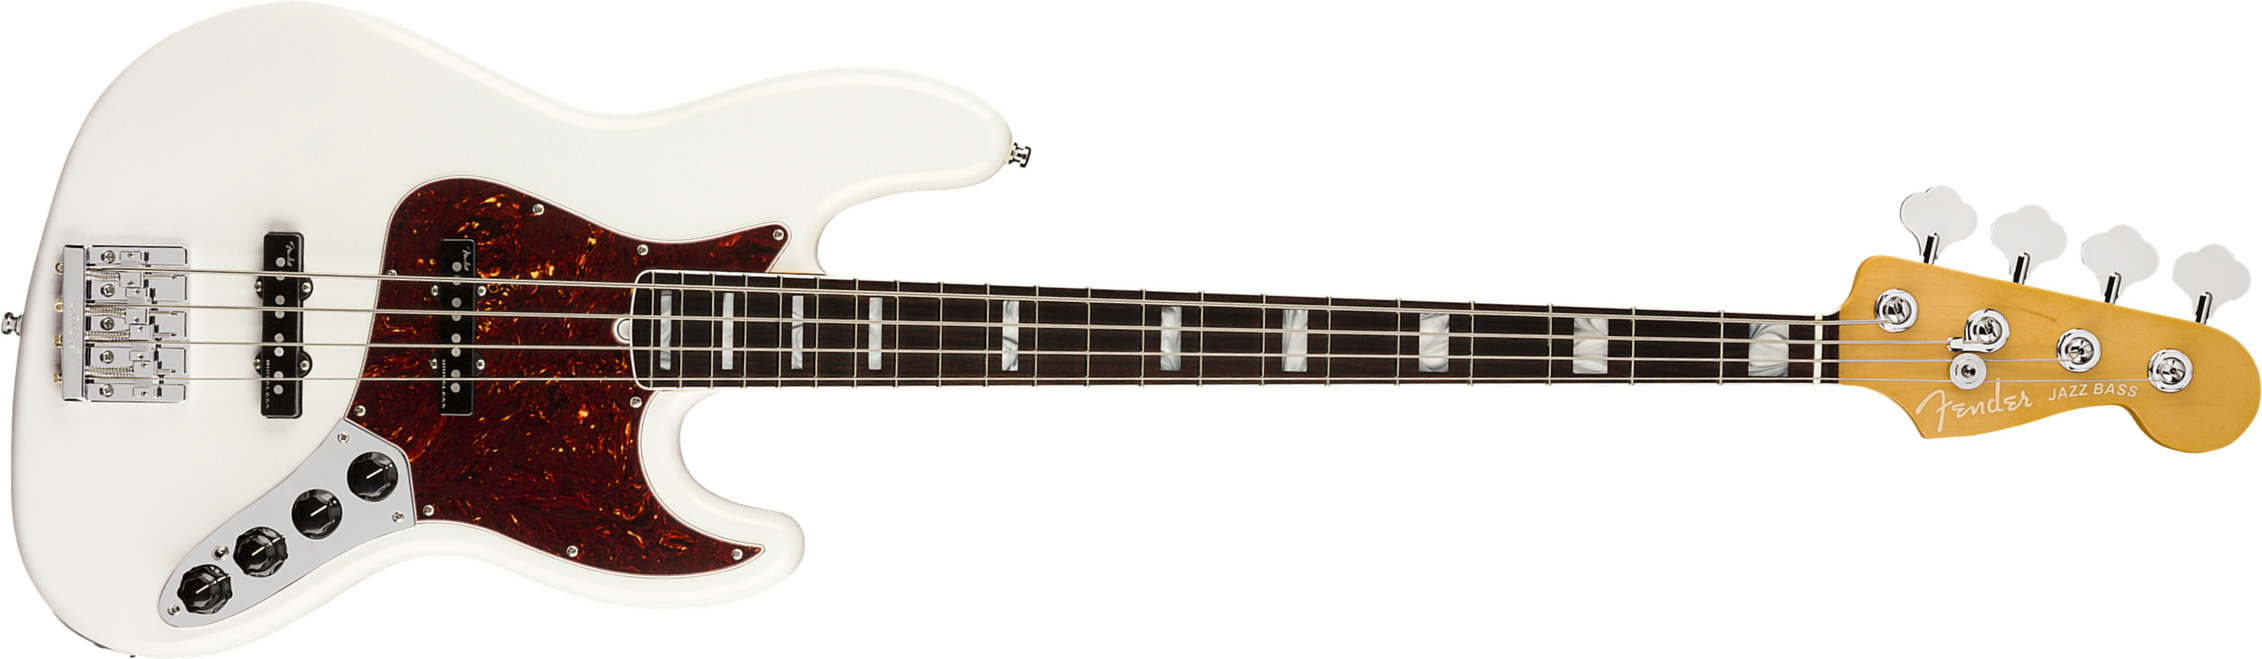 Fender Jazz Bass American Ultra 2019 Usa Rw - Arctic Pearl - Basse Électrique Solid Body - Main picture